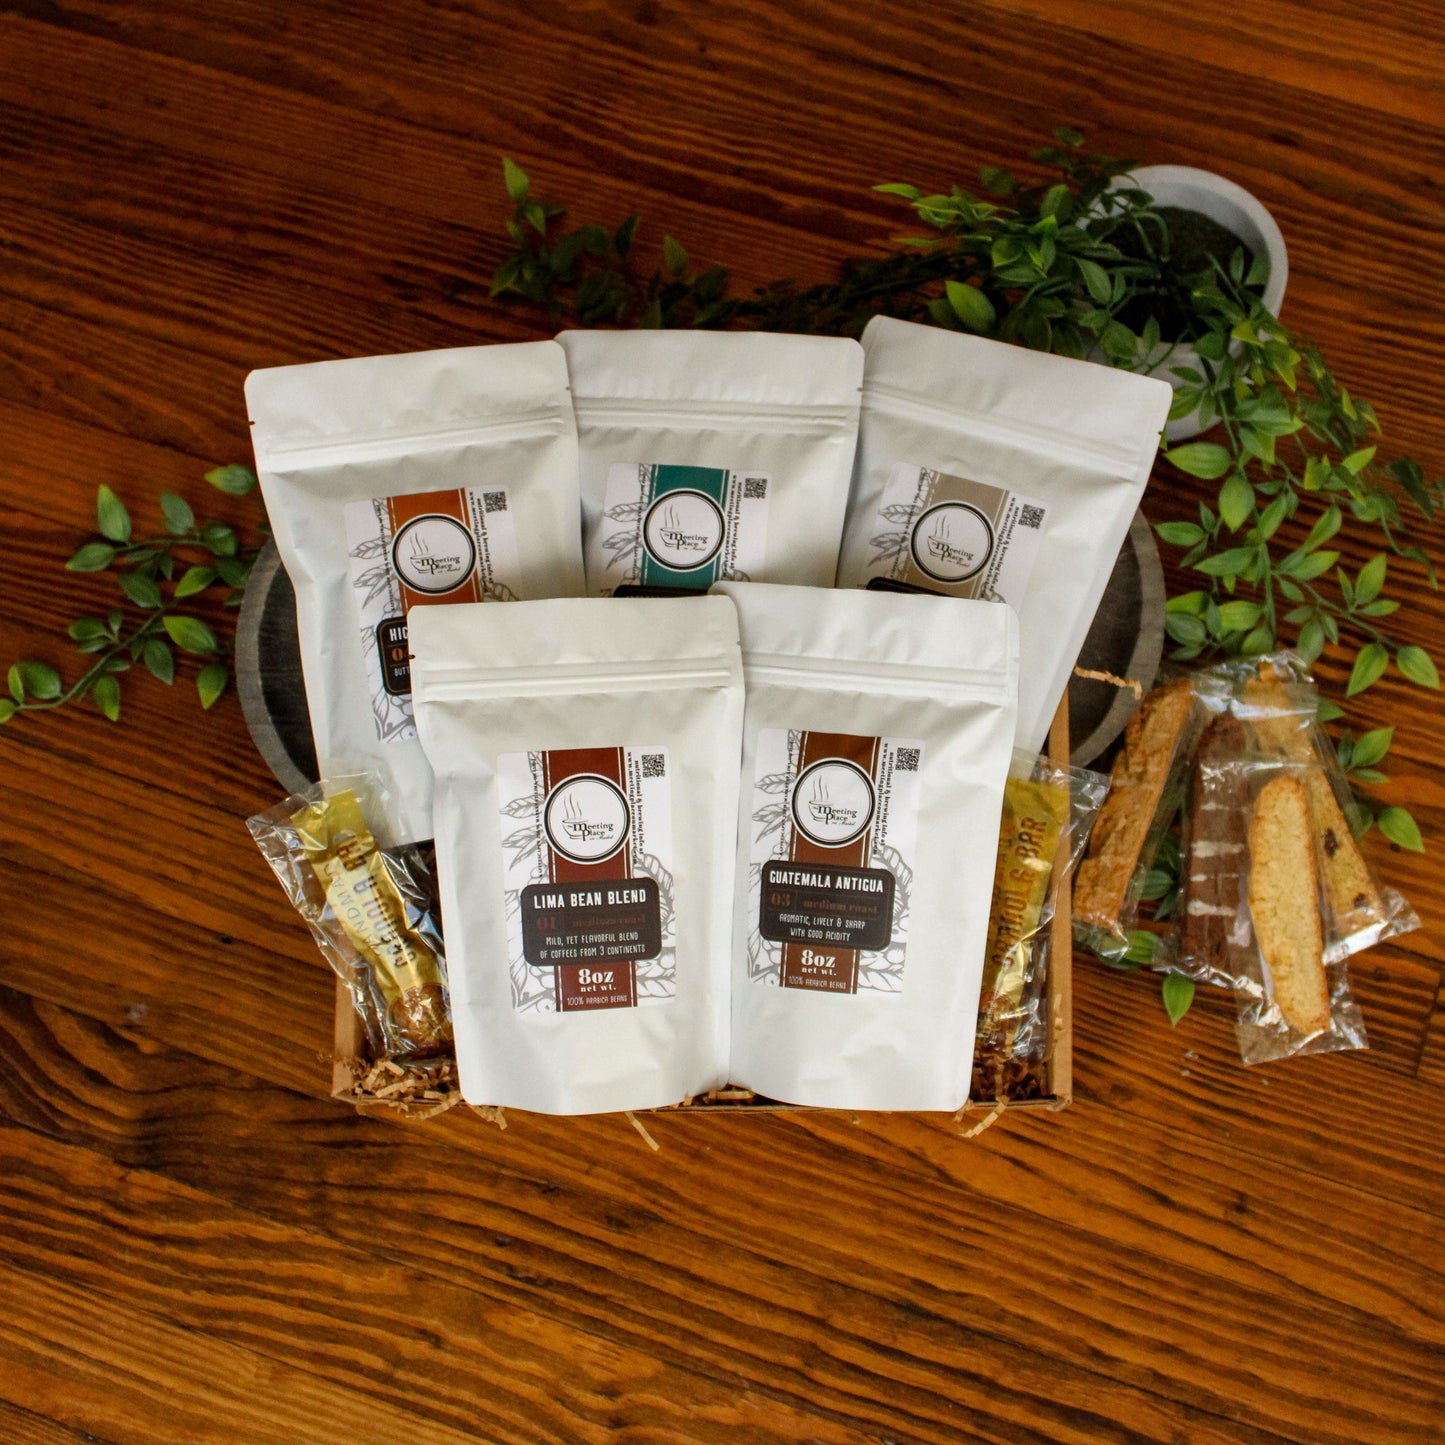 Premium Father's Day Gift Basket with 5 Gourmet Coffees from Around the World Father's Day Gift Basket - The Meeting Place on Market